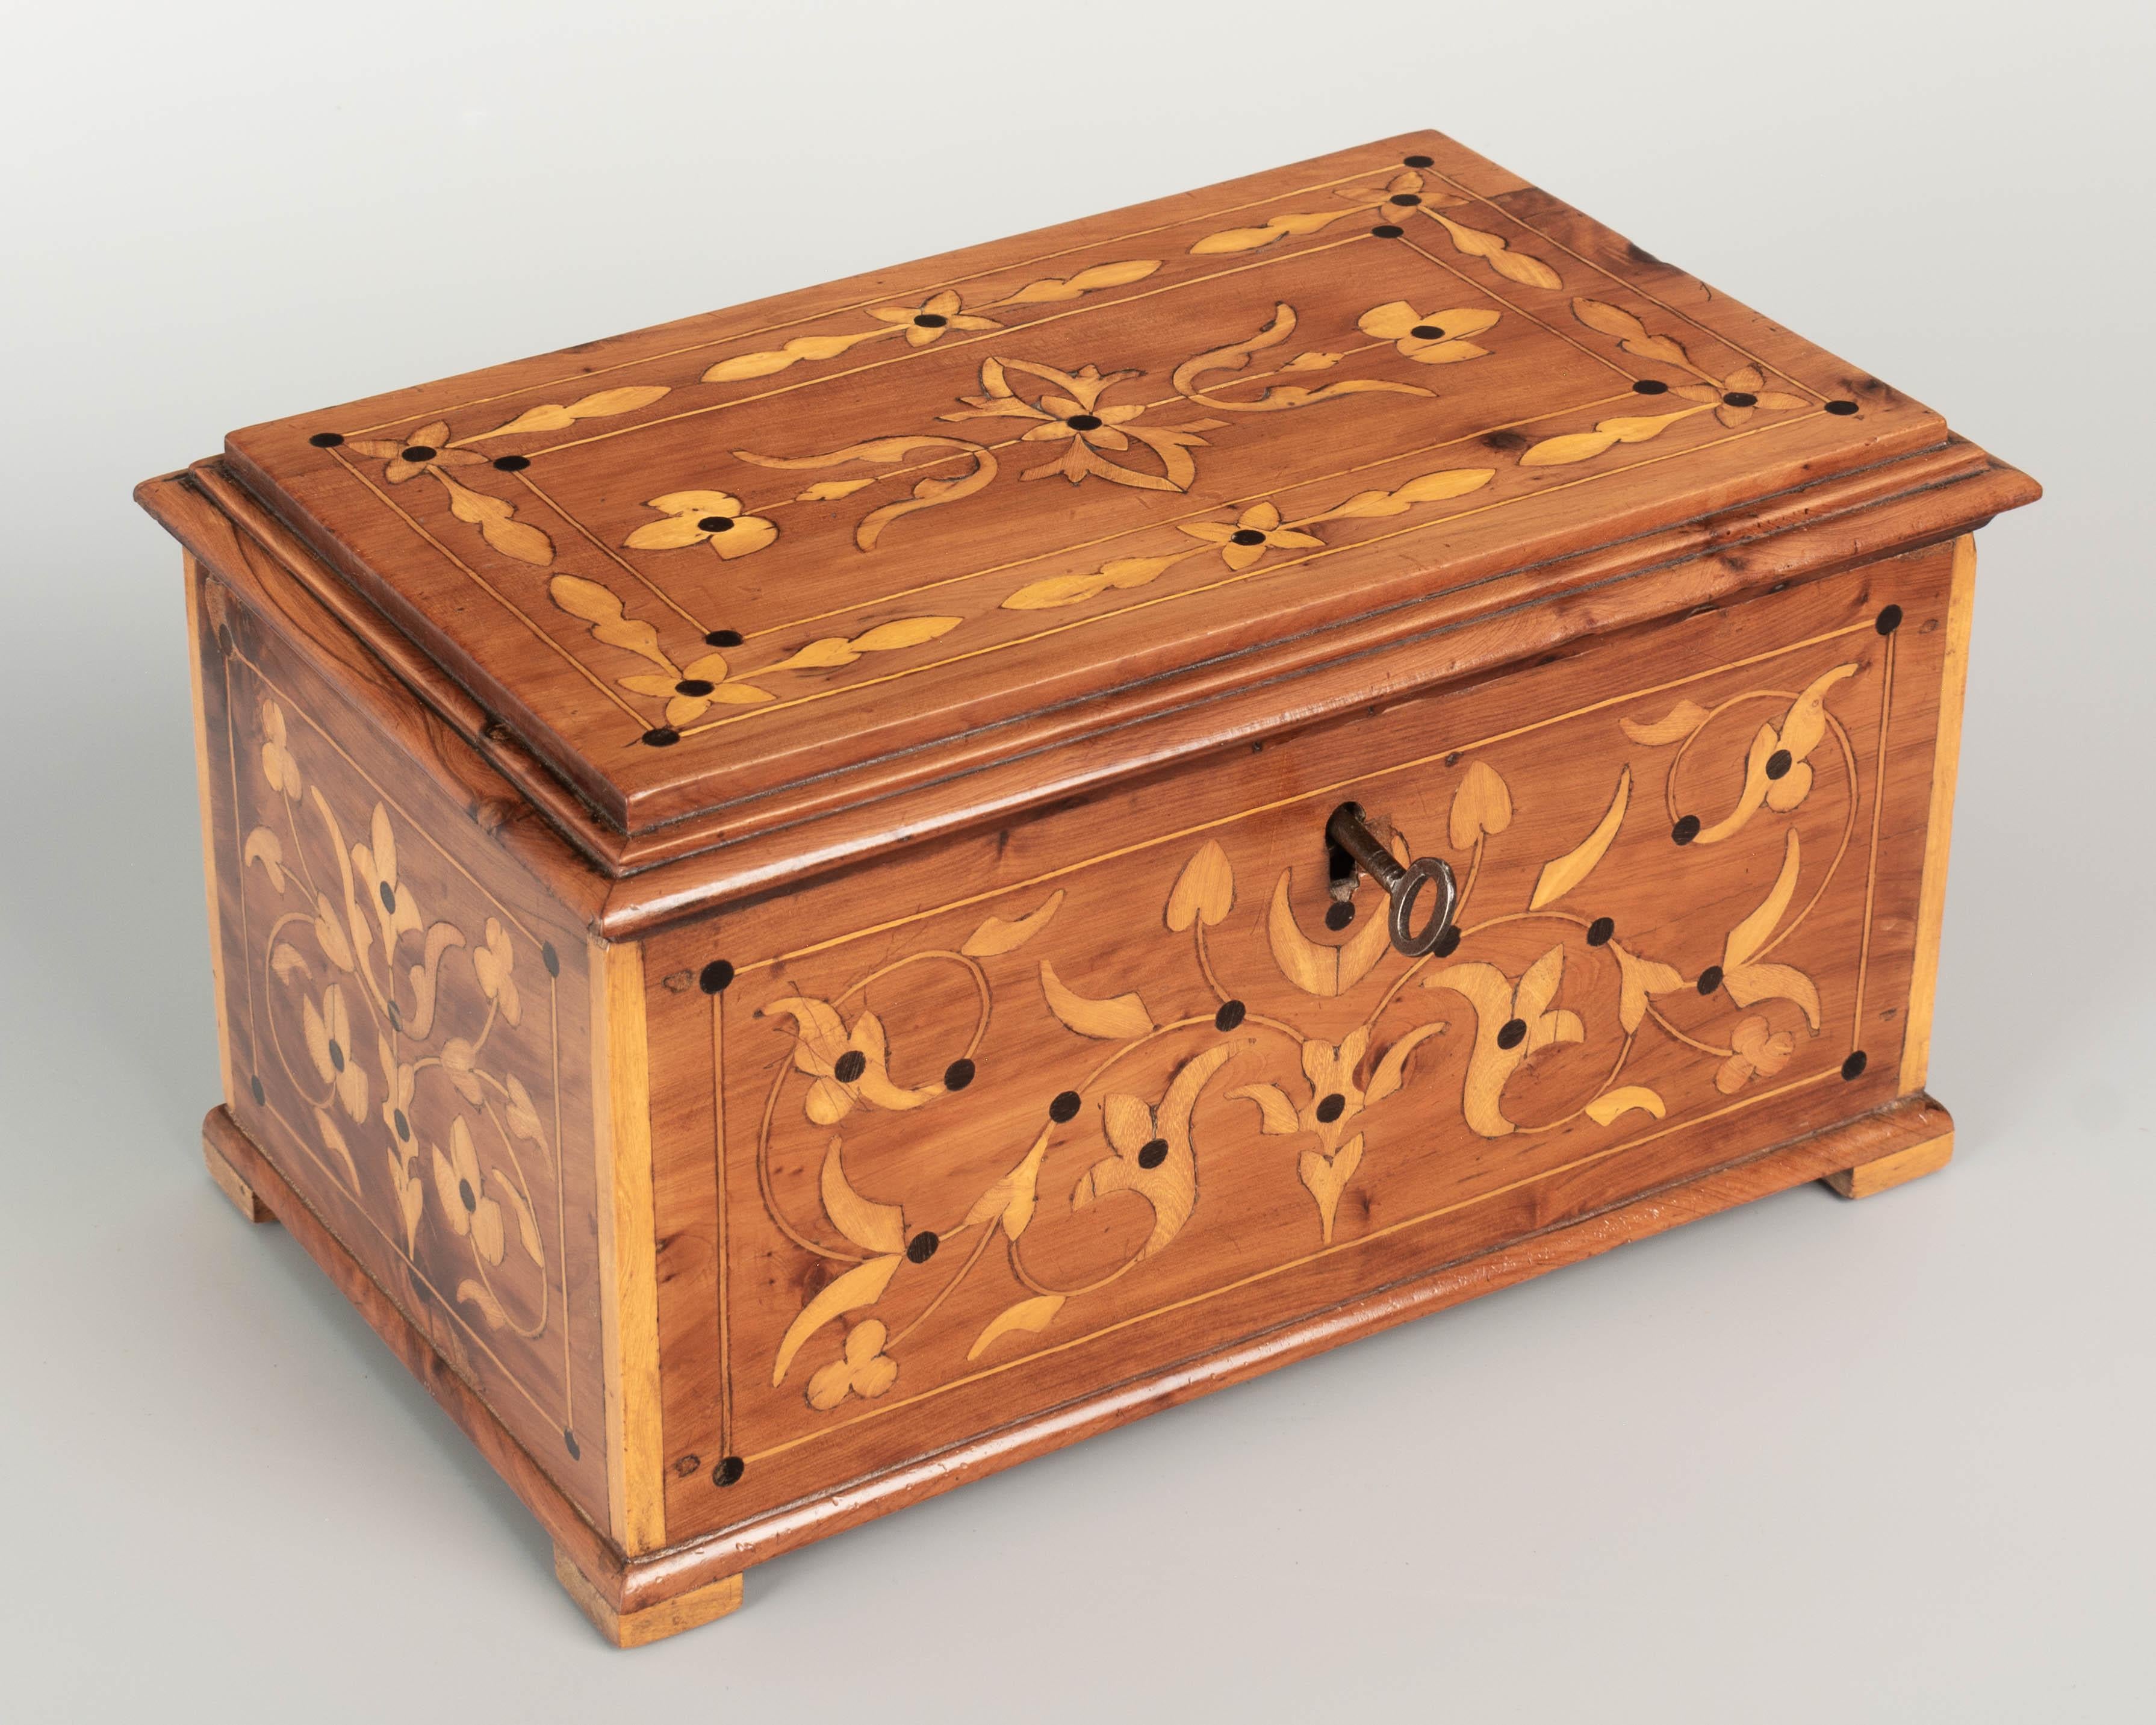 An early 20th Century French marquetry box made of solid cherry with decorative inlay of yew wood. Interior has a lift out tray with divided compartments. Working lock and key. Circa 1900. 
Dimensions: 11.25